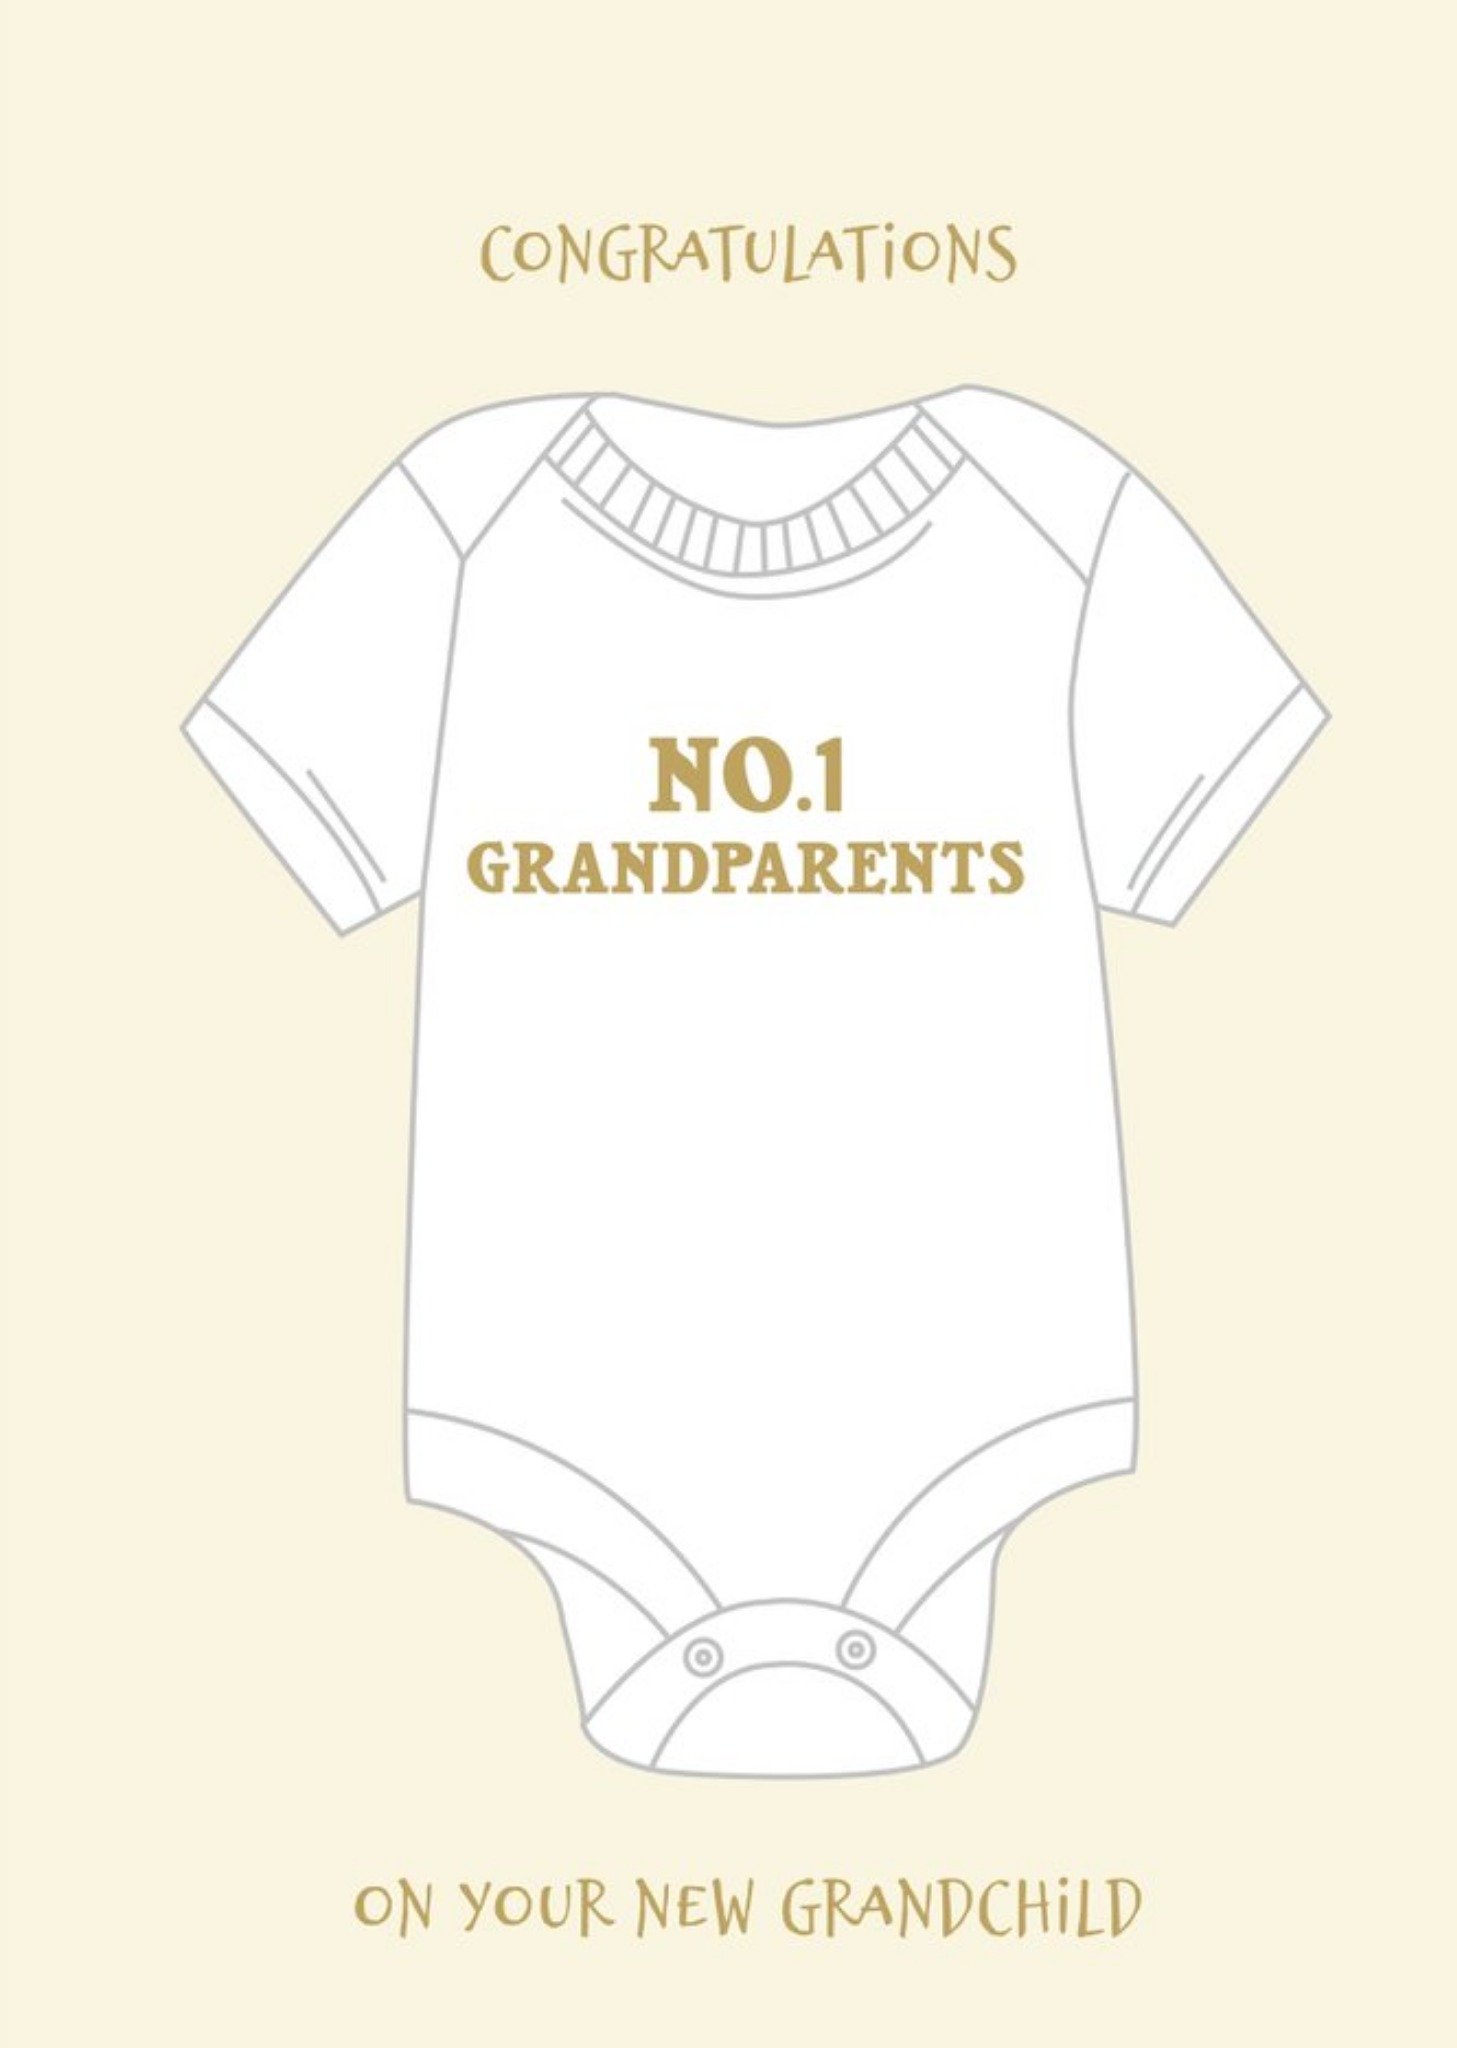 Moonpig Pearl And Ivy Illustrated Baby Grow No.1 Grandparents Congratulations Card, Large